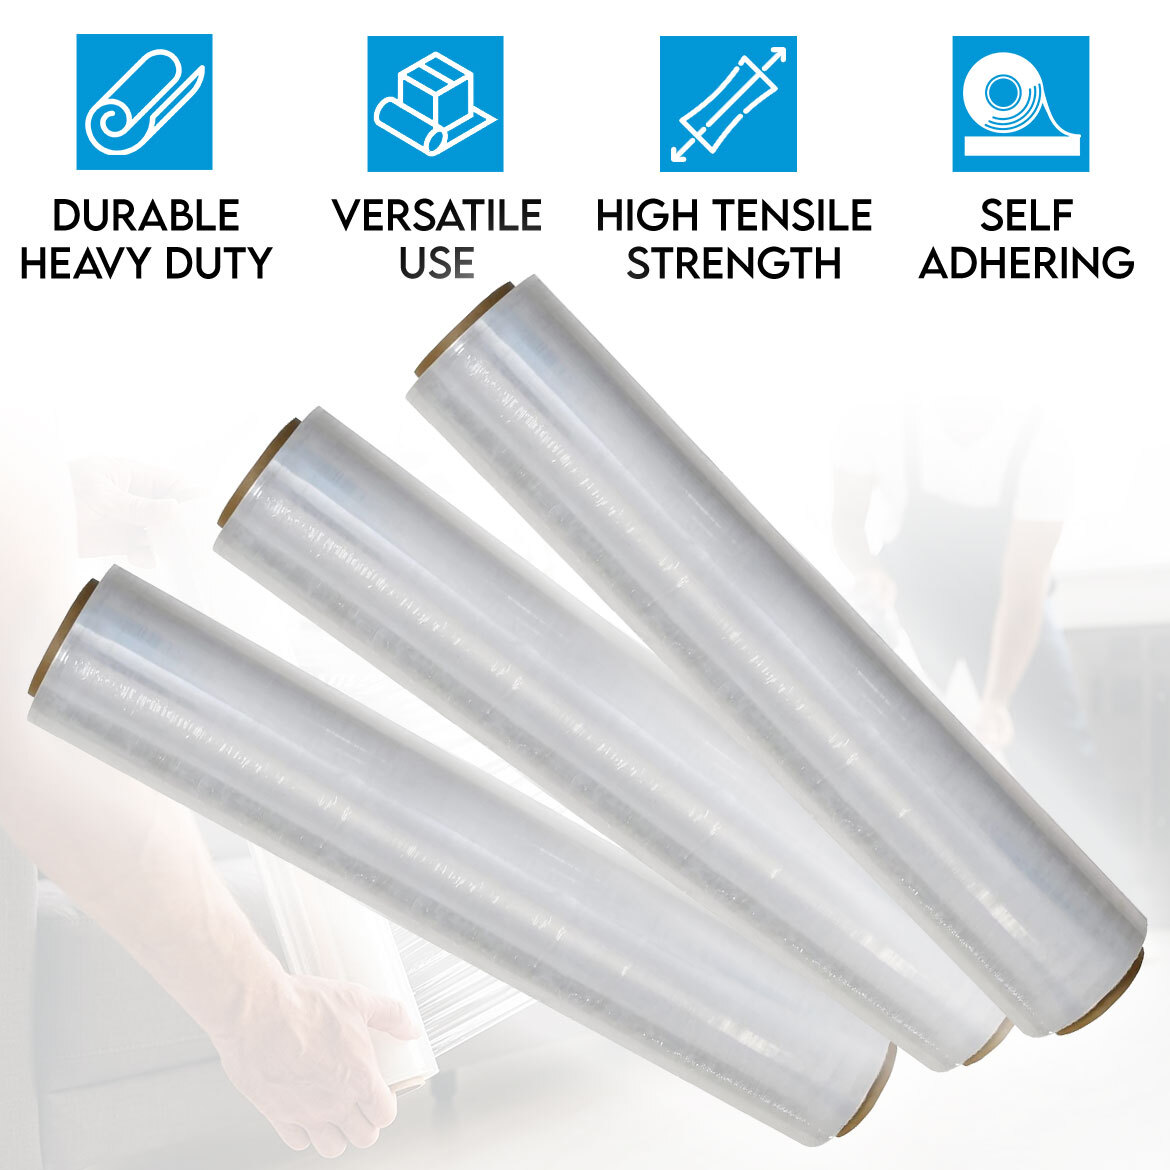 Stretch Wrap 500mm X 240M 23Âµ Micron Durable Clear Cling Plastic Pallet Self-Adhering Packing Film 3 Rolls, Heavy Duty, High Tensile Strength